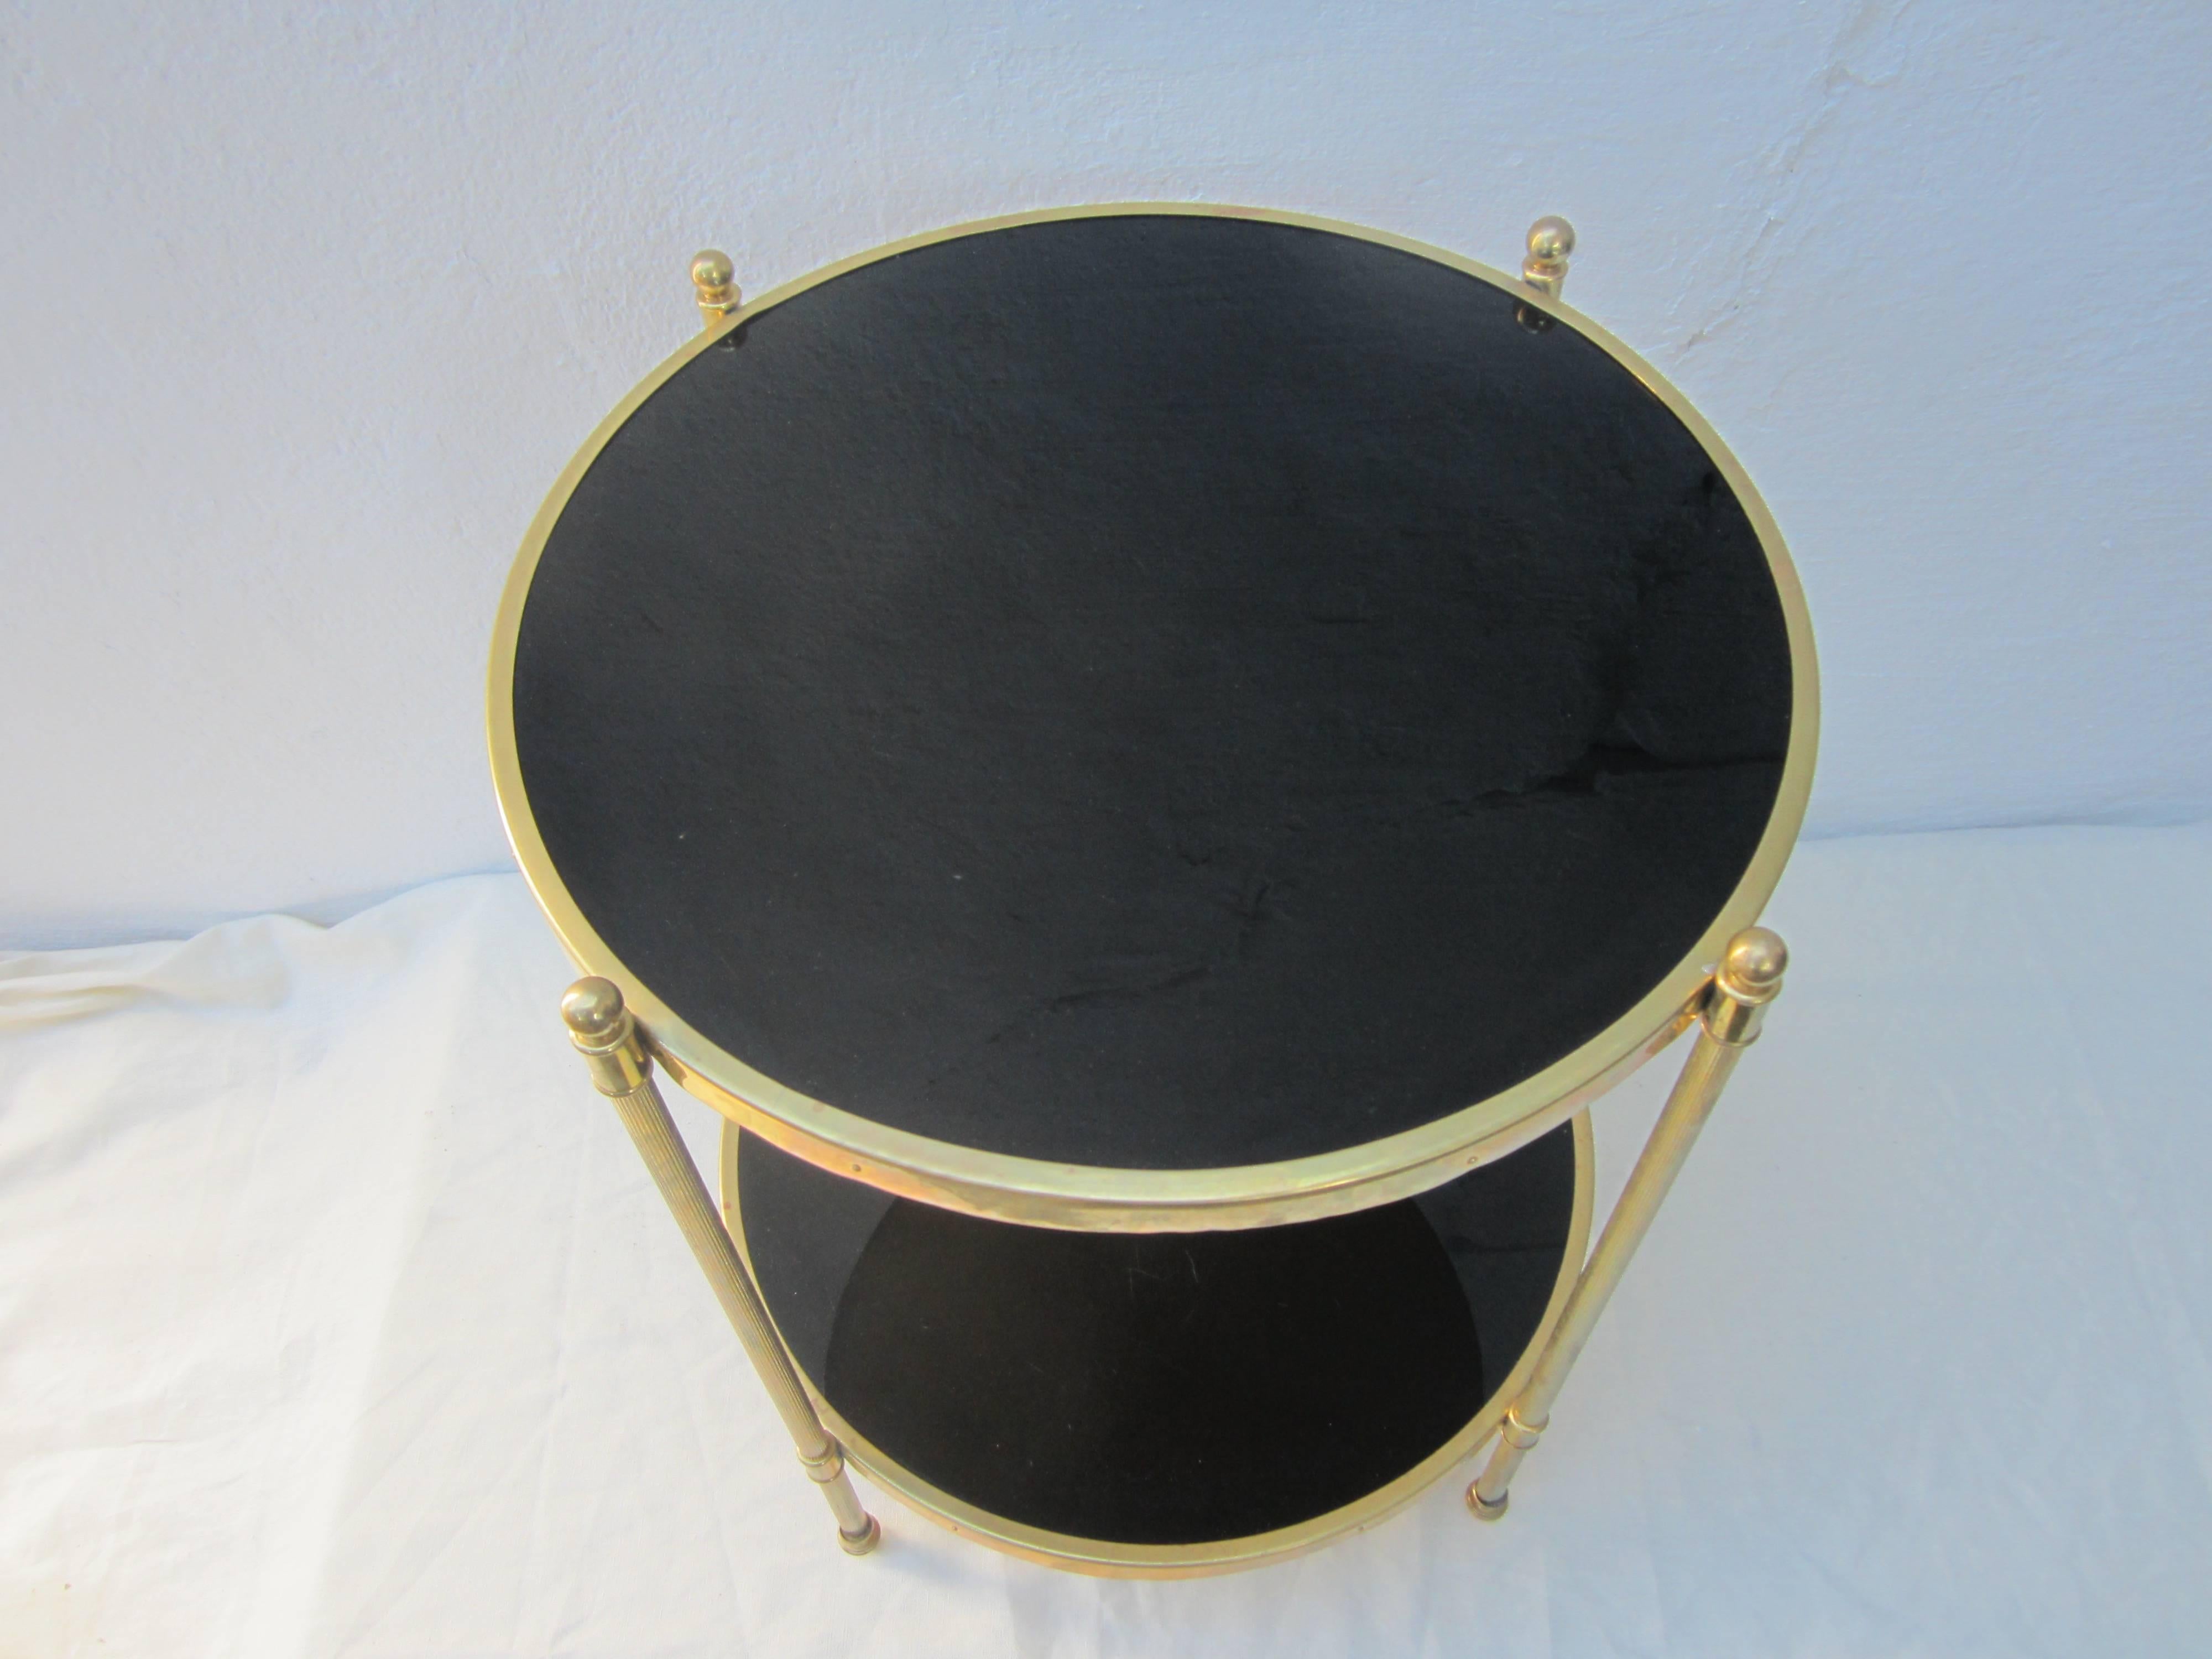 Maison Jansen style side table. Brass frame with black glass.